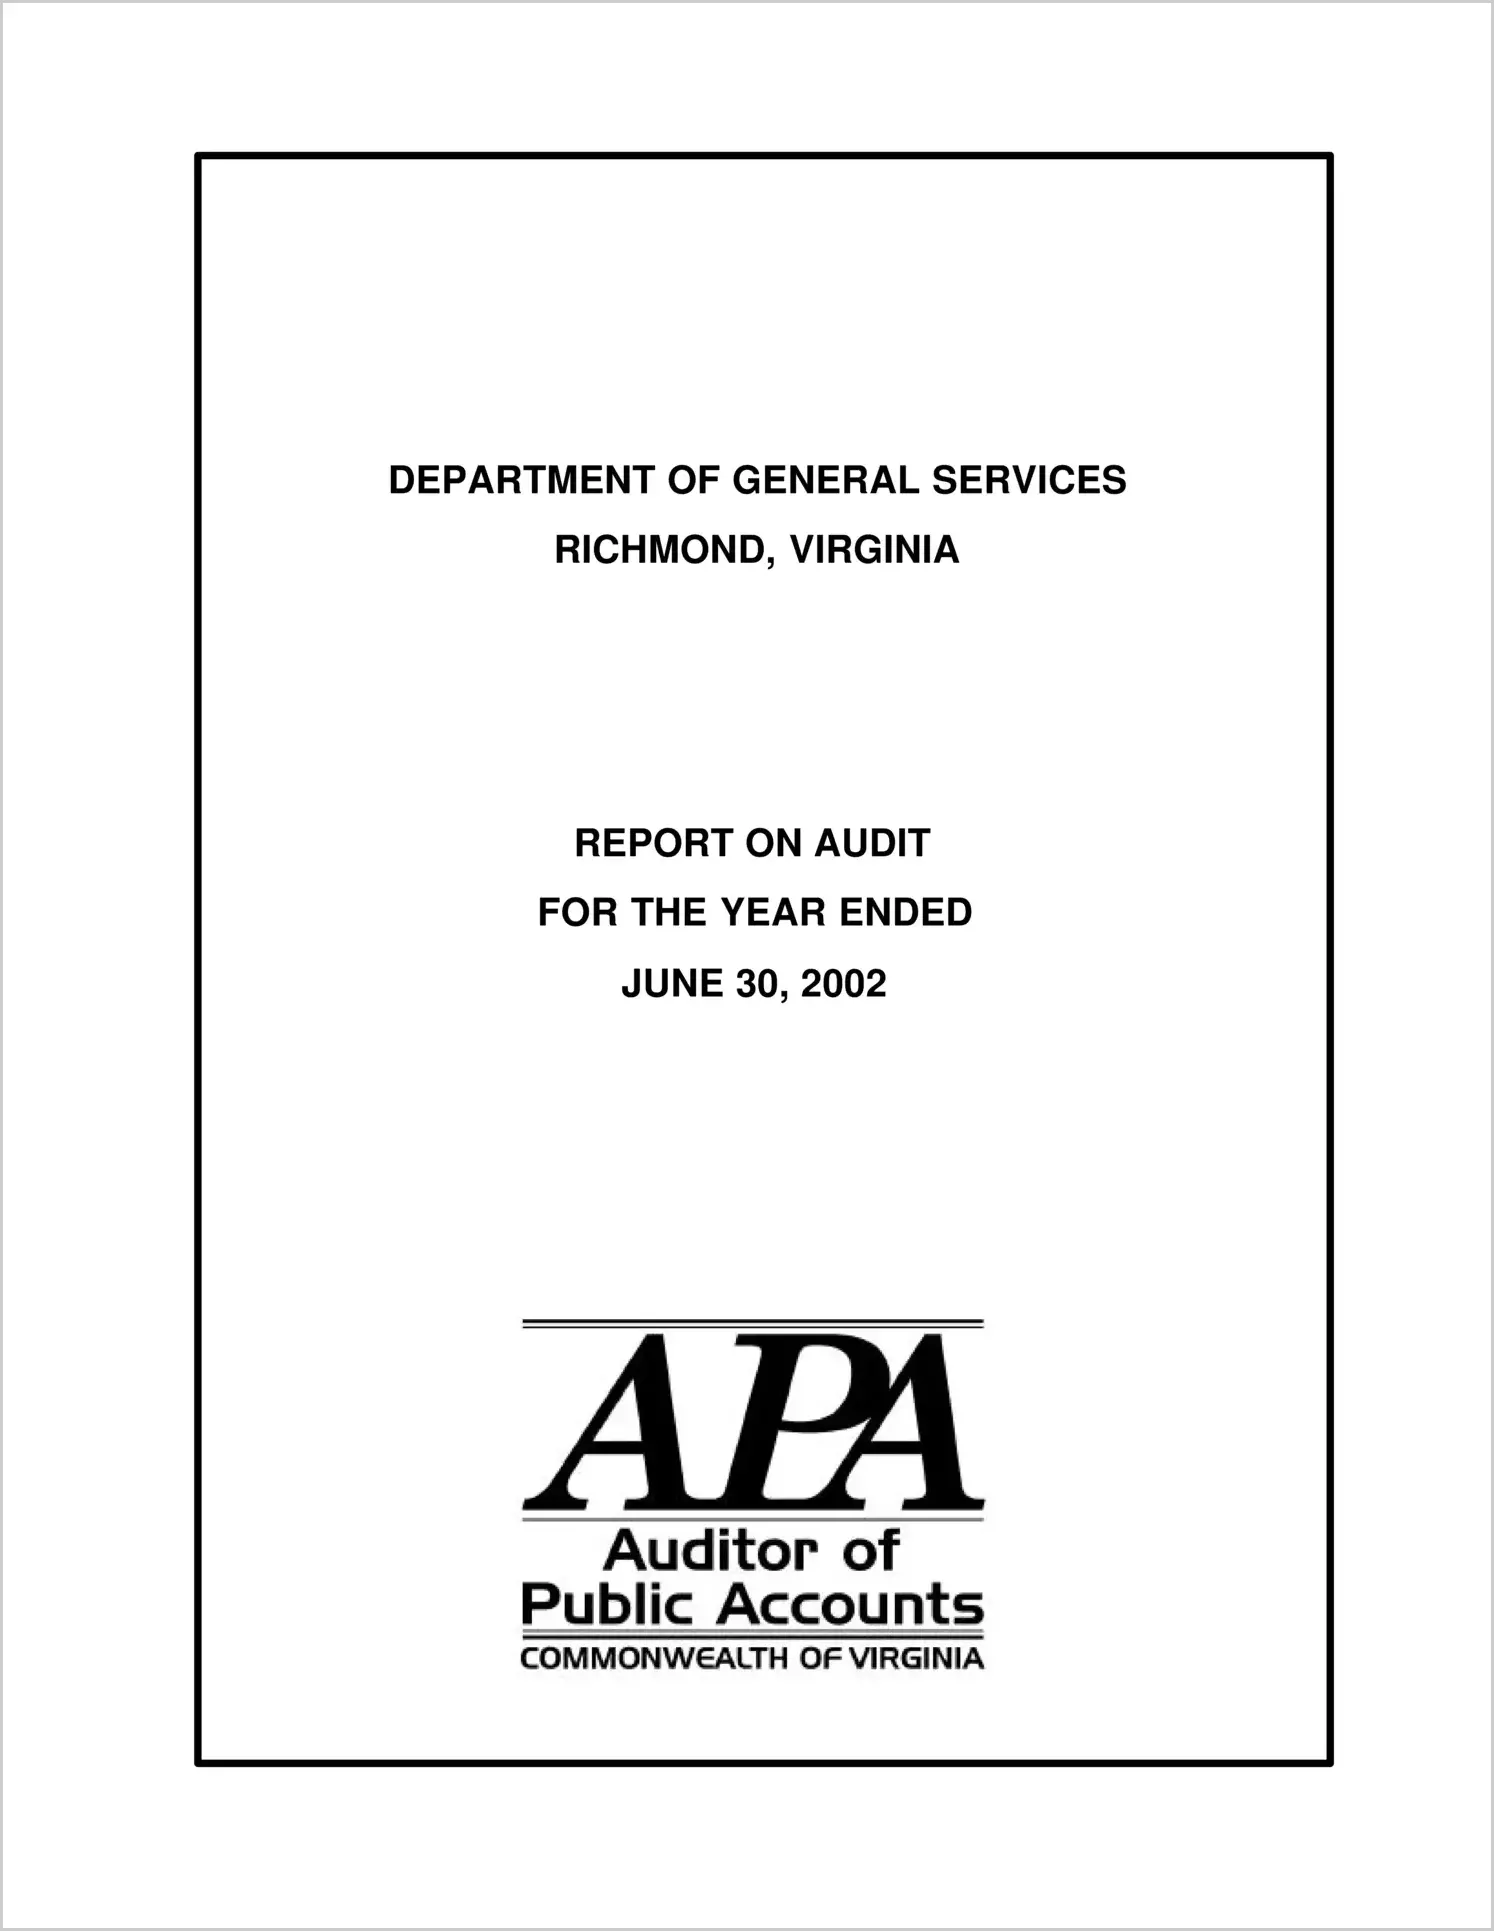 Department of General Services for the year ended June 30, 2002